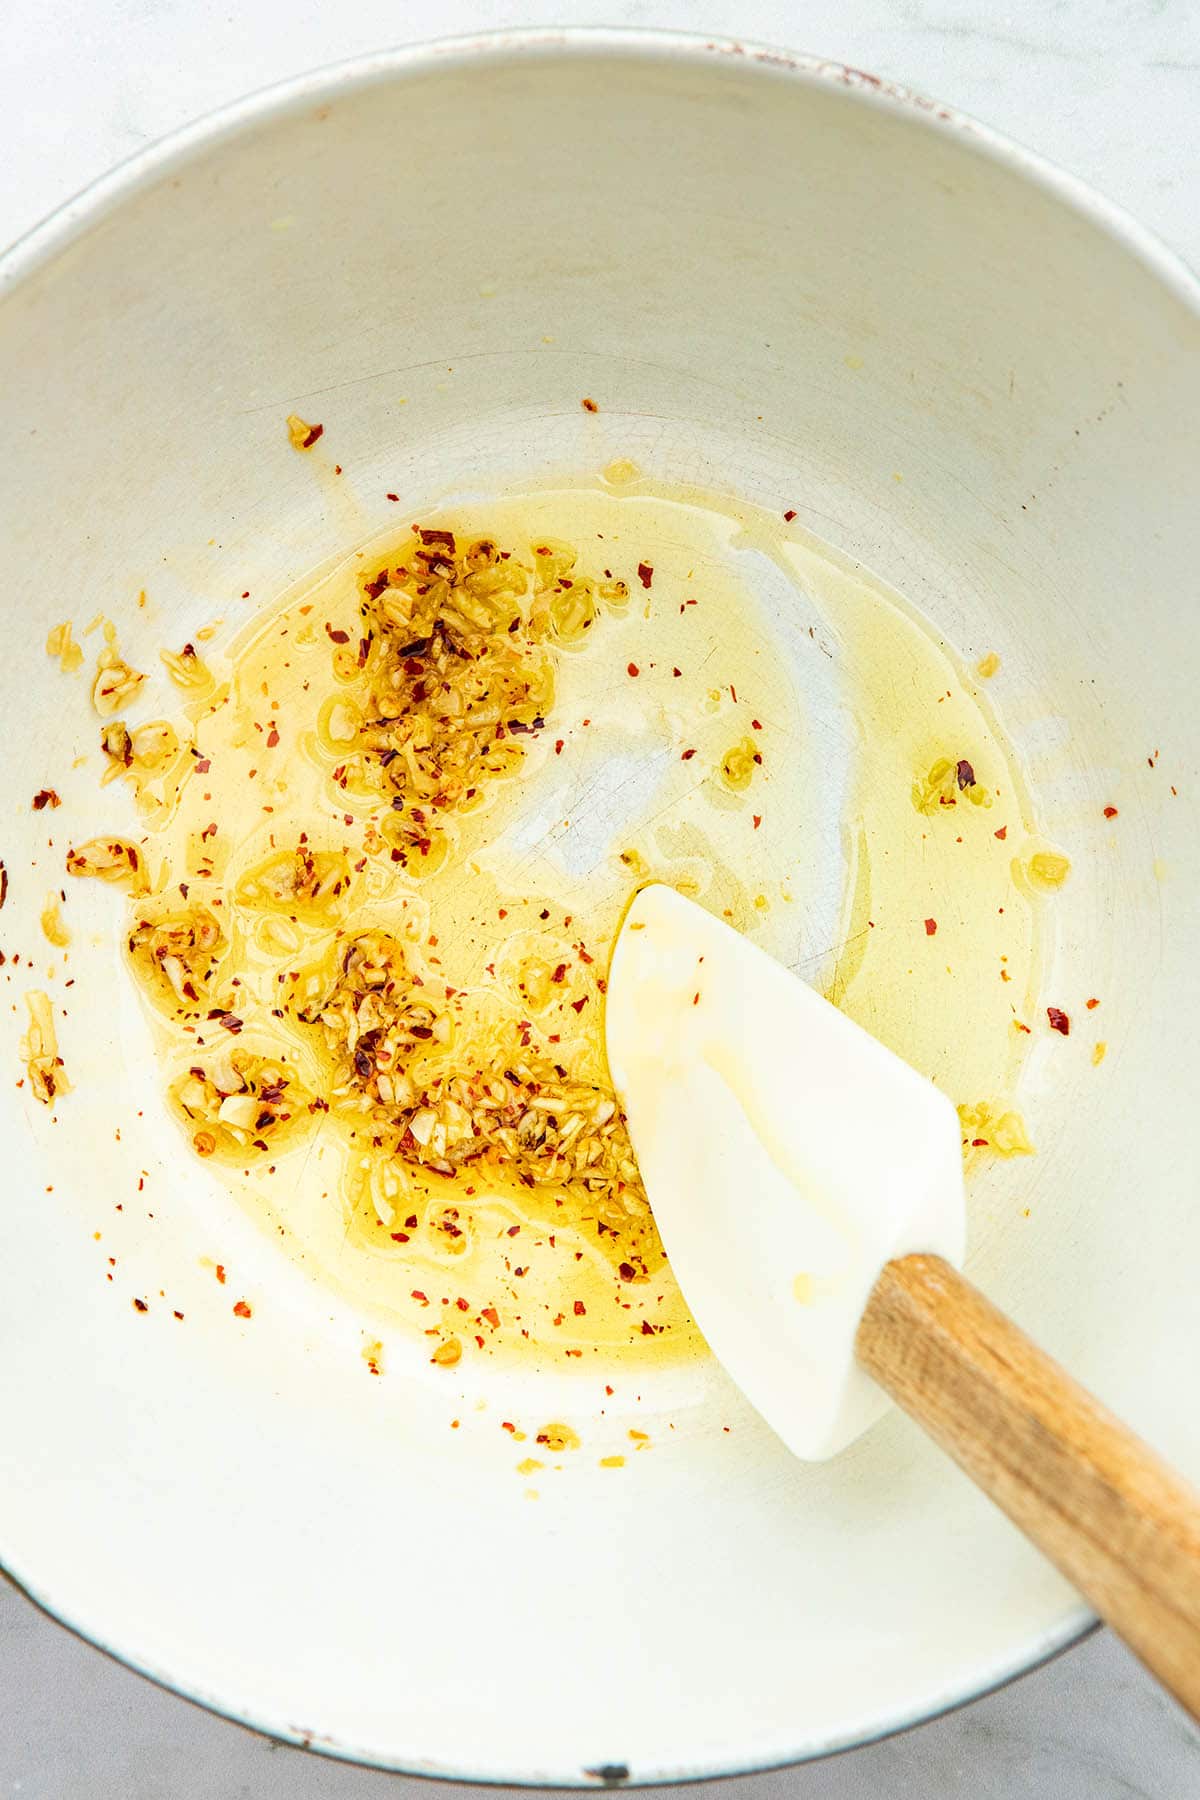 Garlic, olive oil, and red pepper flakes being stirred with a rubber spatula in the bottom of a pot.